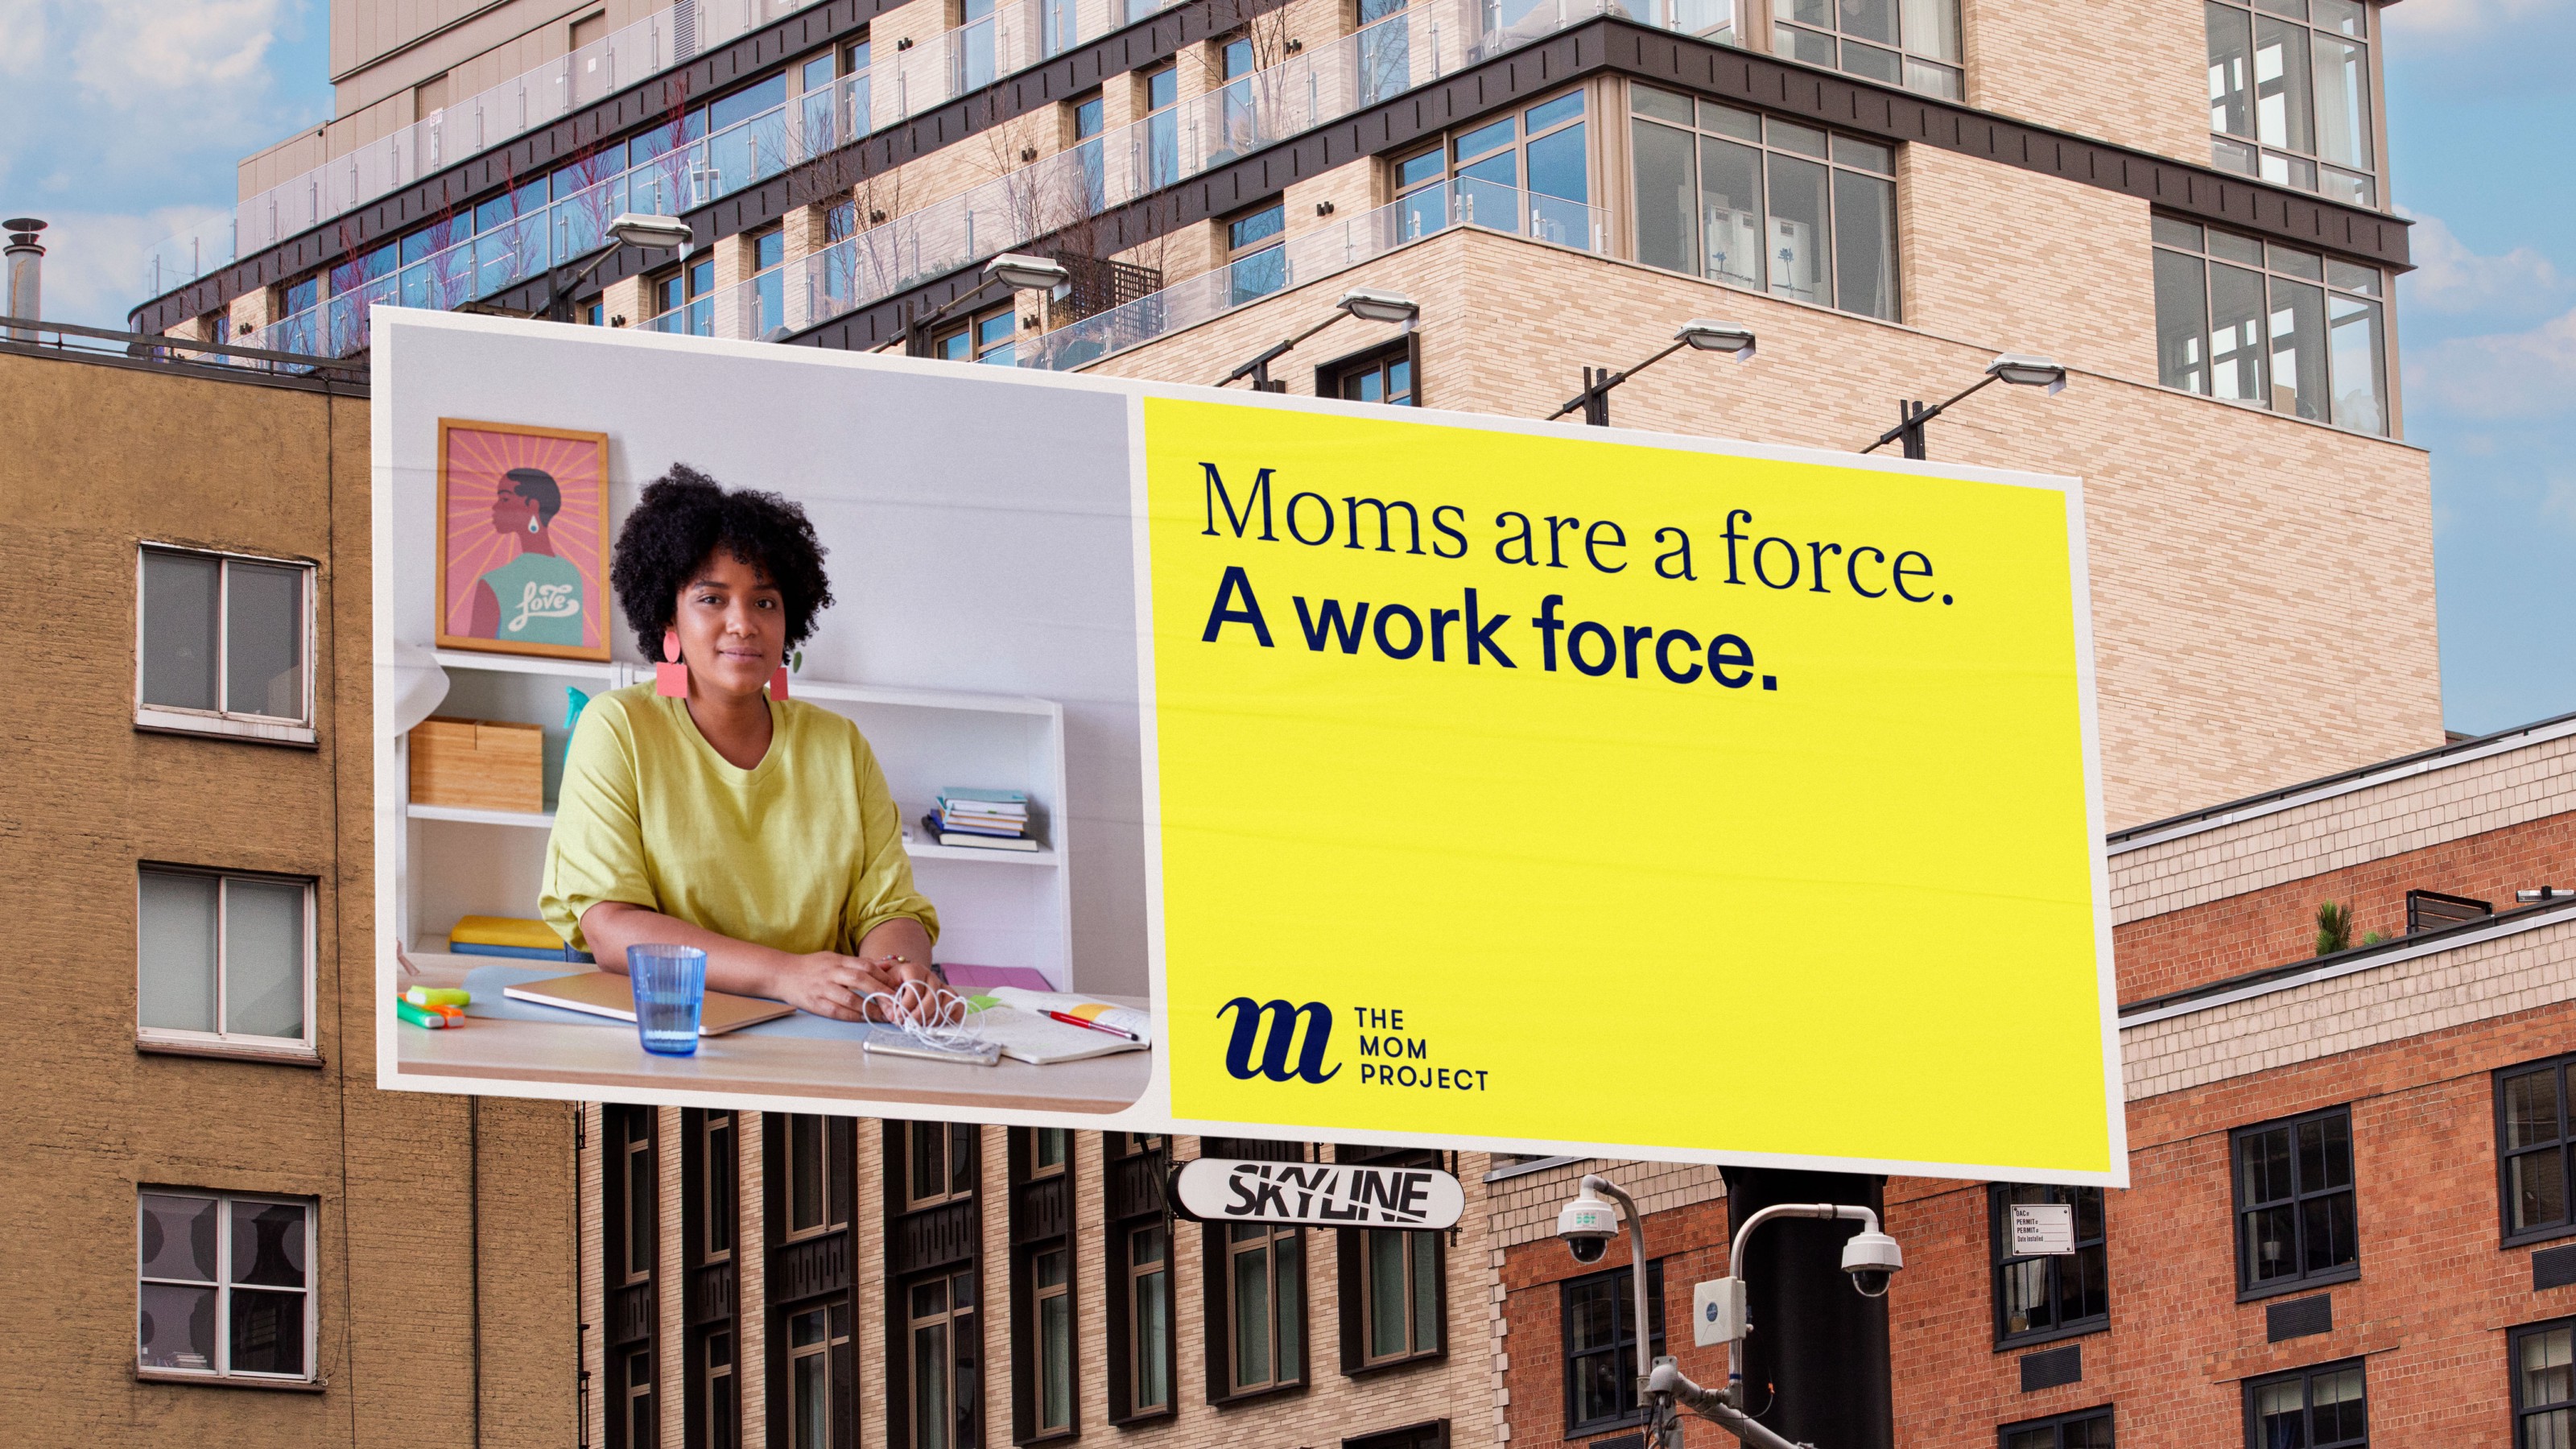 b﻿illboard with photo of a mom next to headline “Moms are a force. A workforce.”